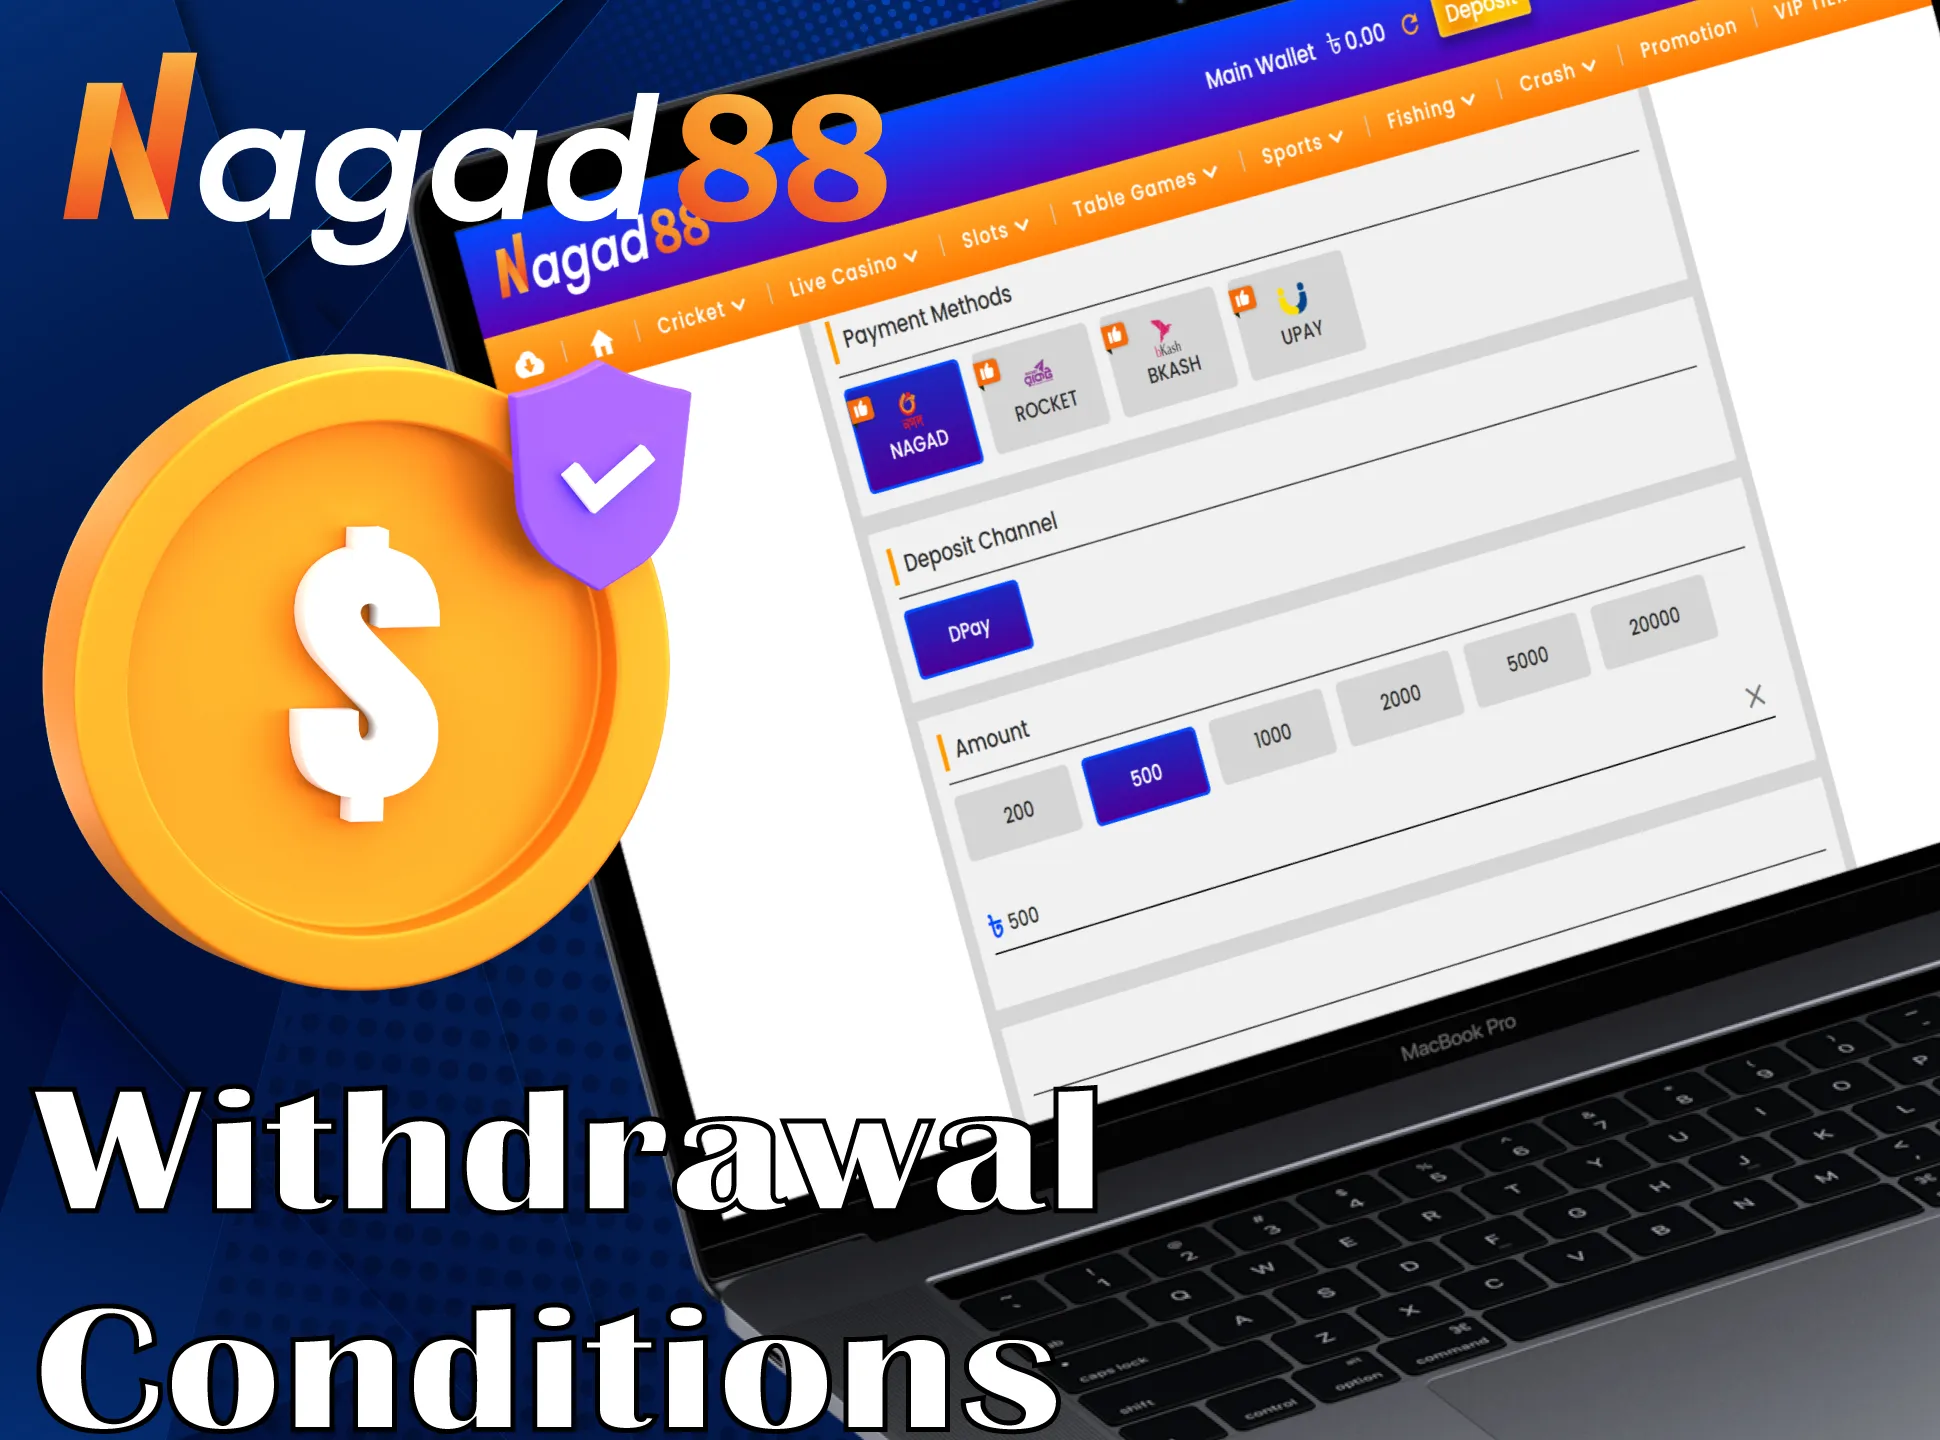 Withdraw your winnings easily with Nagad88.